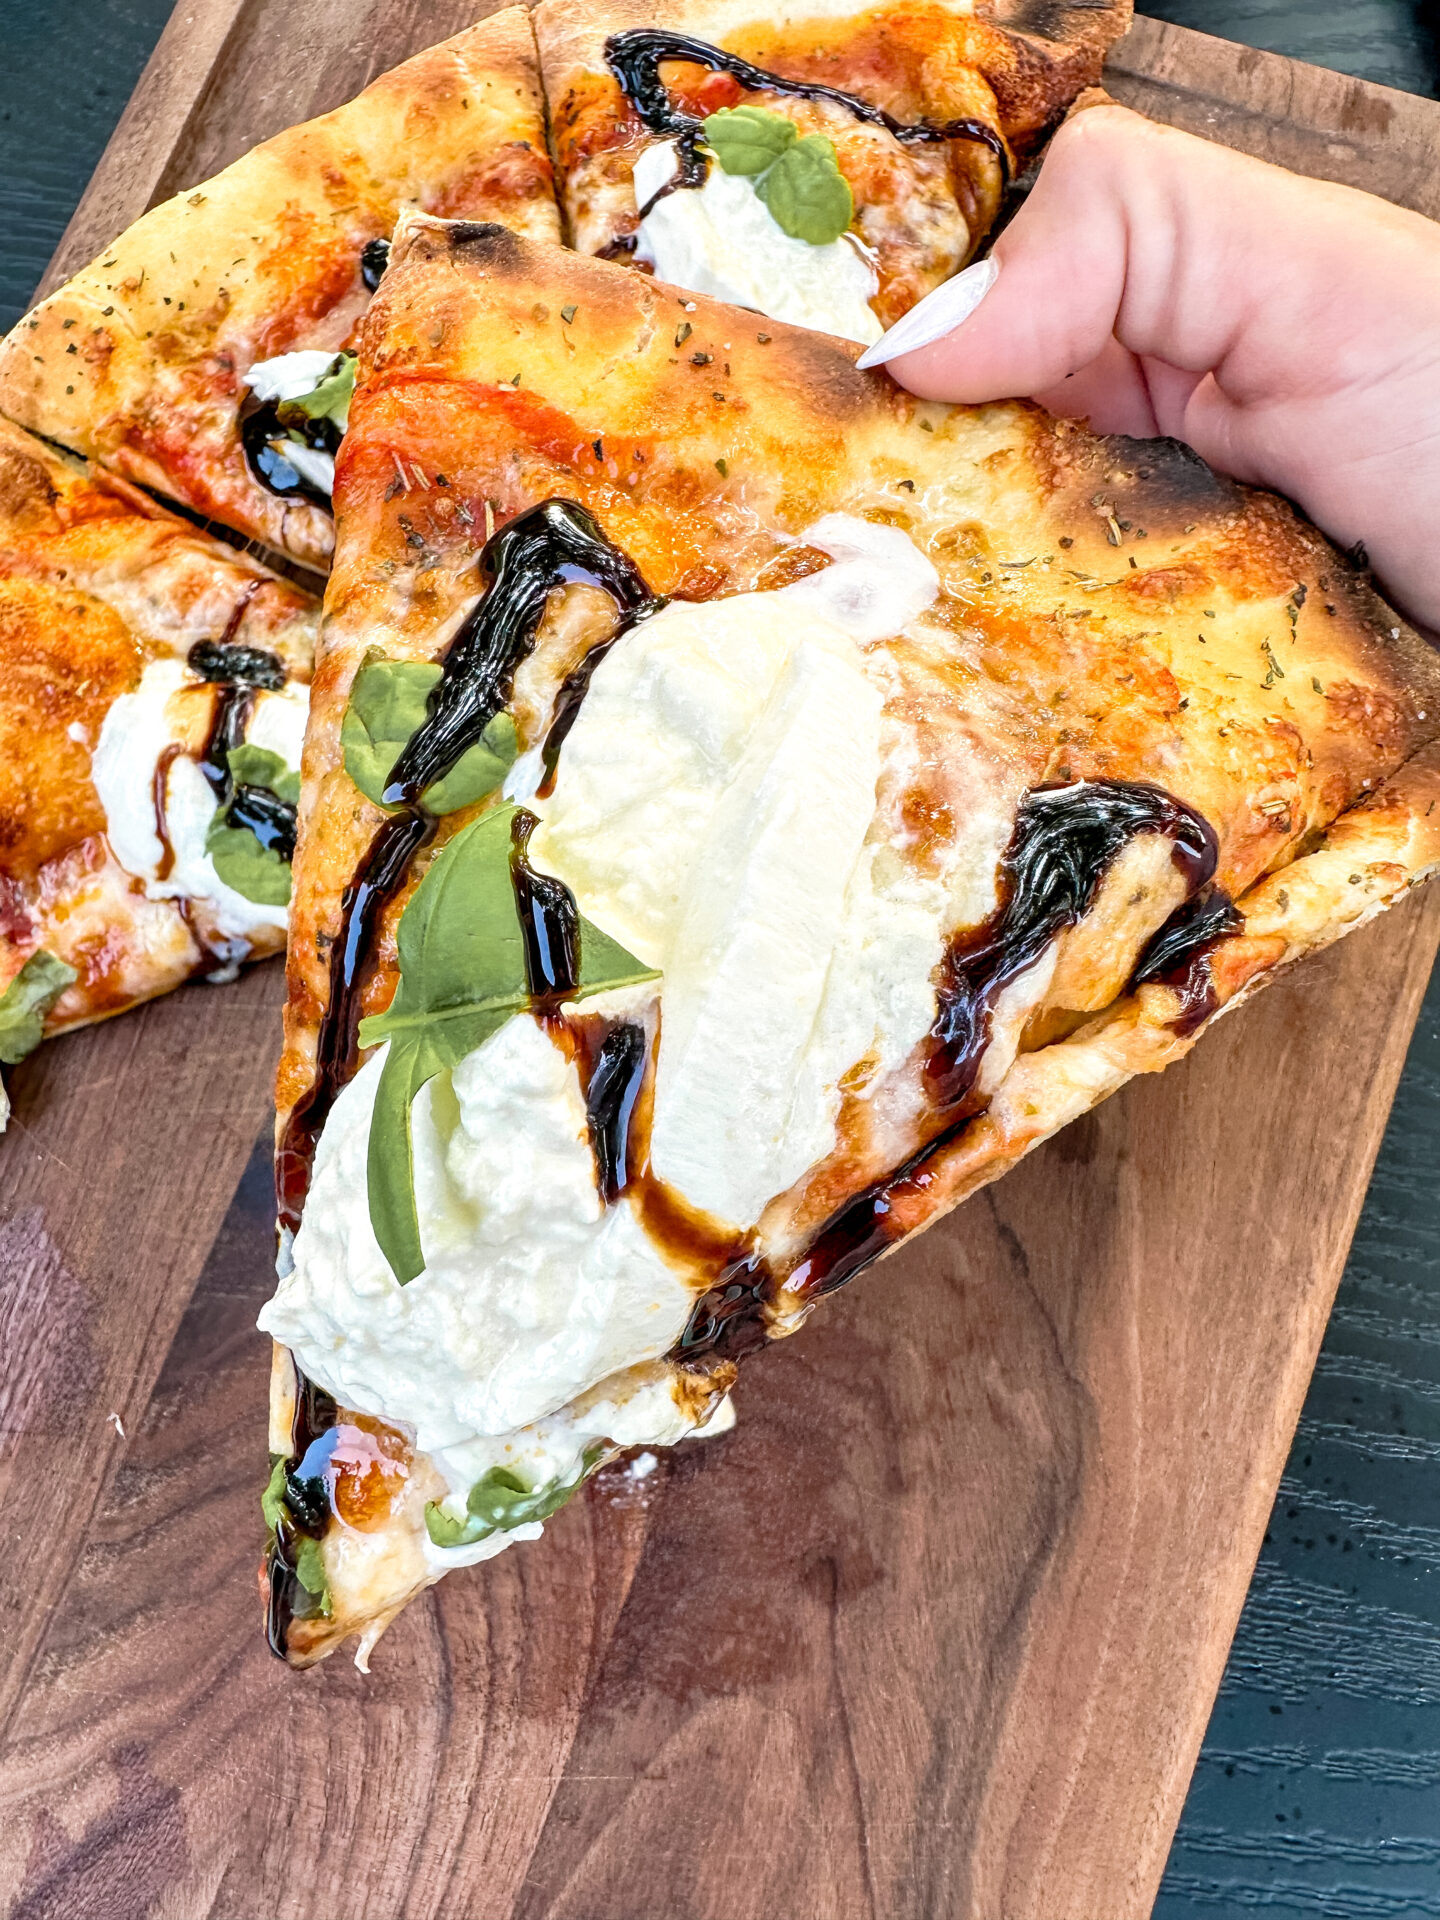 Ooni Koda 16 review. Our favorite pizza oven by lifestyle and food blogger Angela Lanter